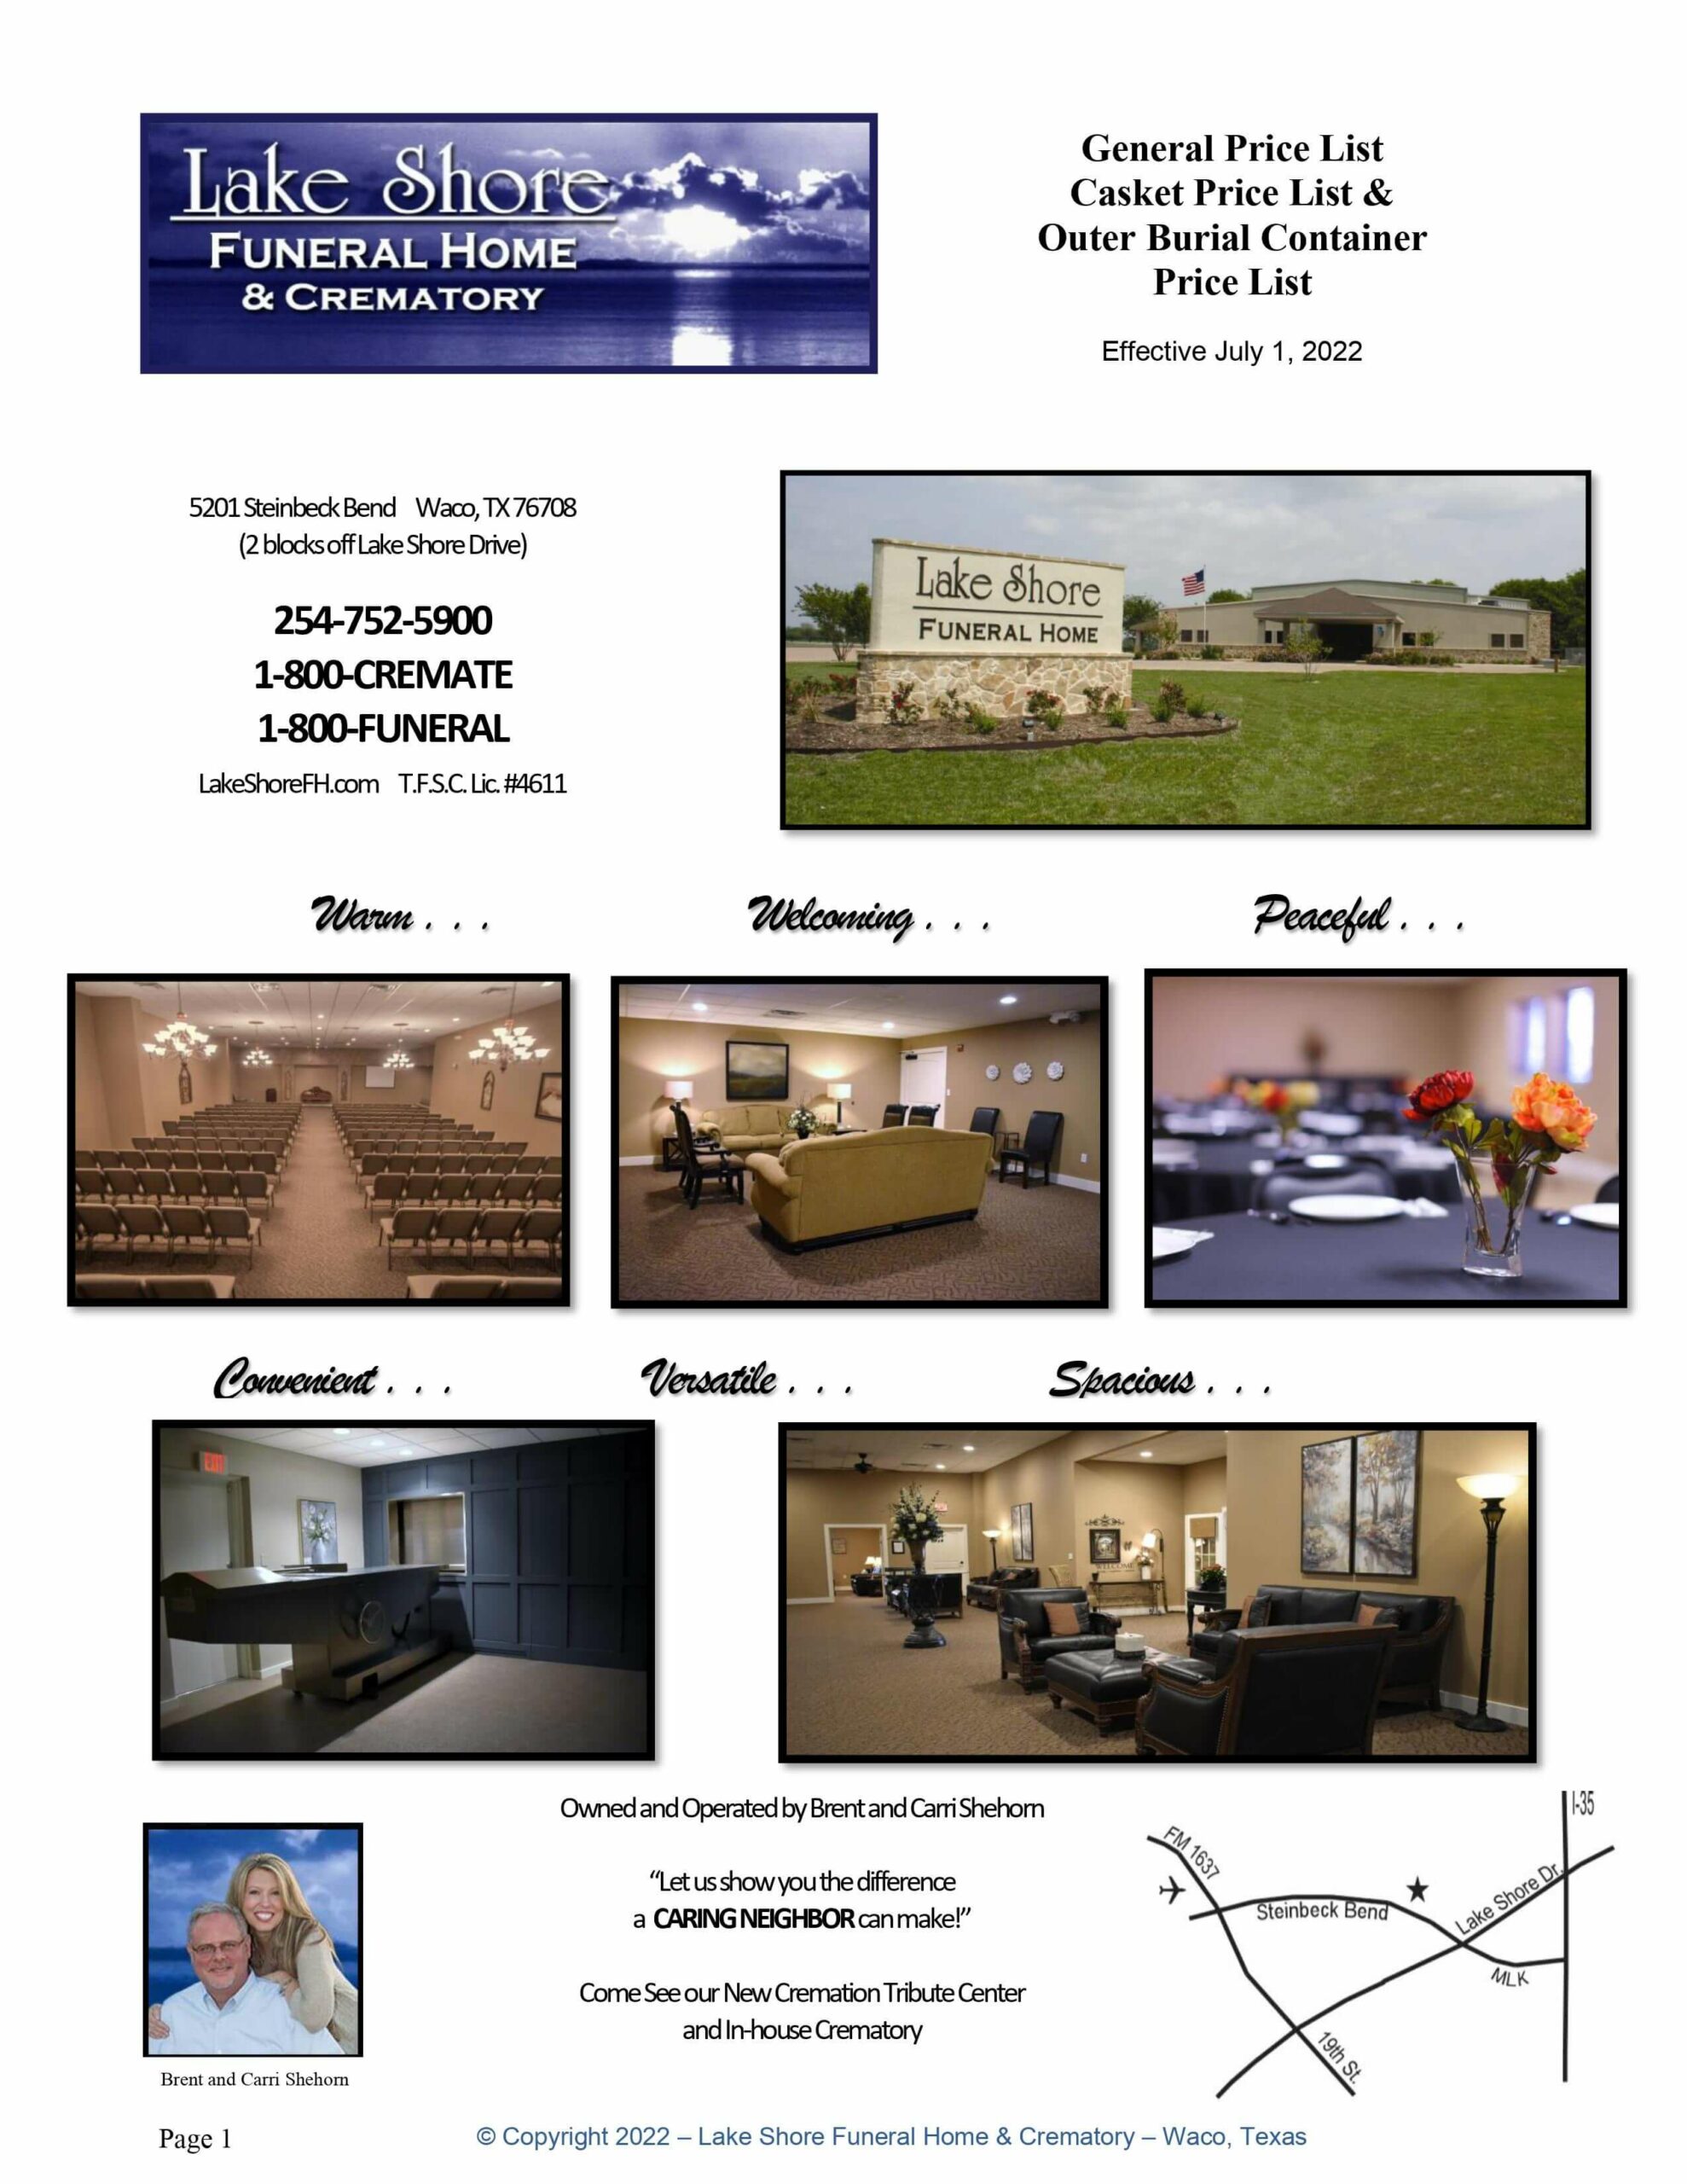 Lake Shore Funeral Home General Price List